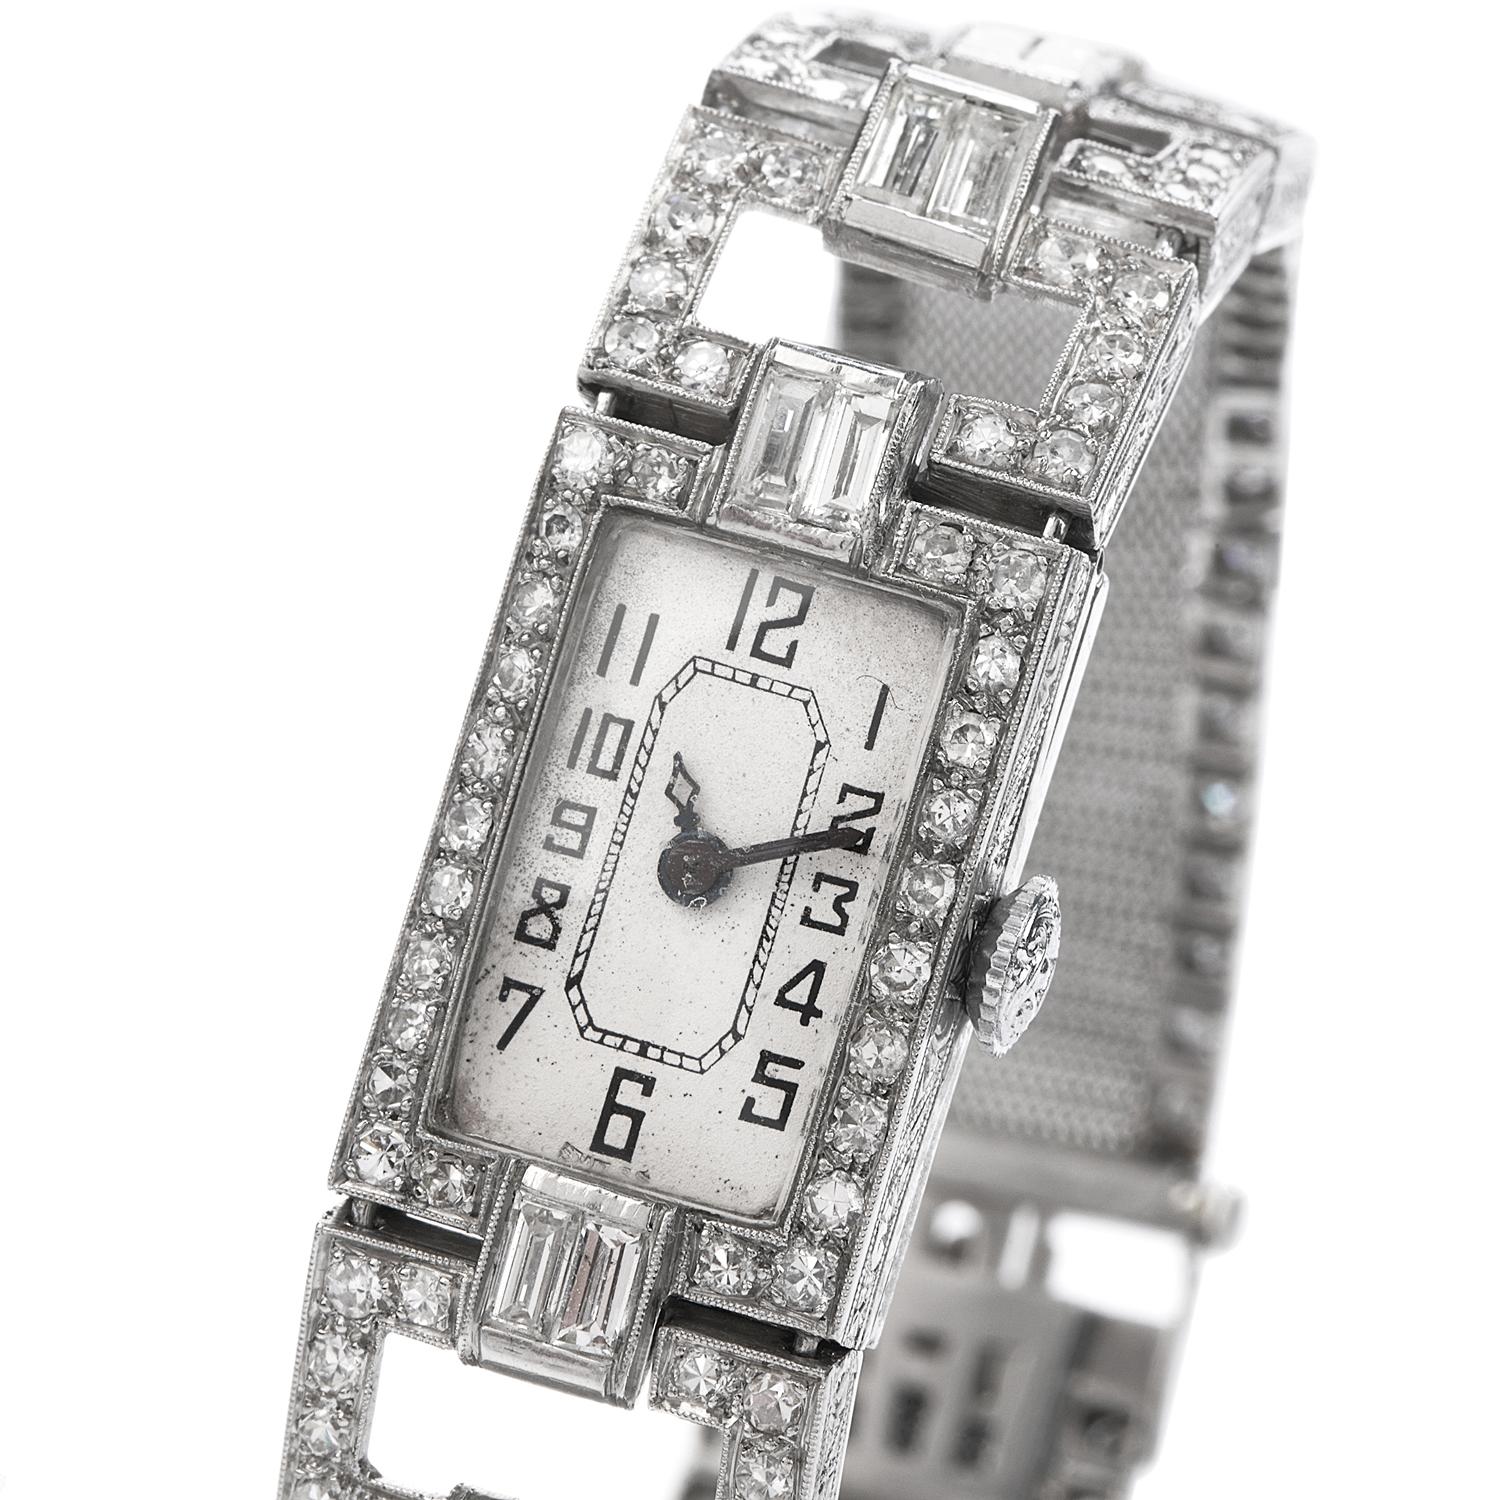 This timeless Antique art deco Ladies diamond watch, crafted in sensual 42.8 grams of platinum. This mesh link flexible watch was created in 1920's era.   Featuring 16 larger  bagguet cut Diamonds and 168 round faceted icy white Diamonds